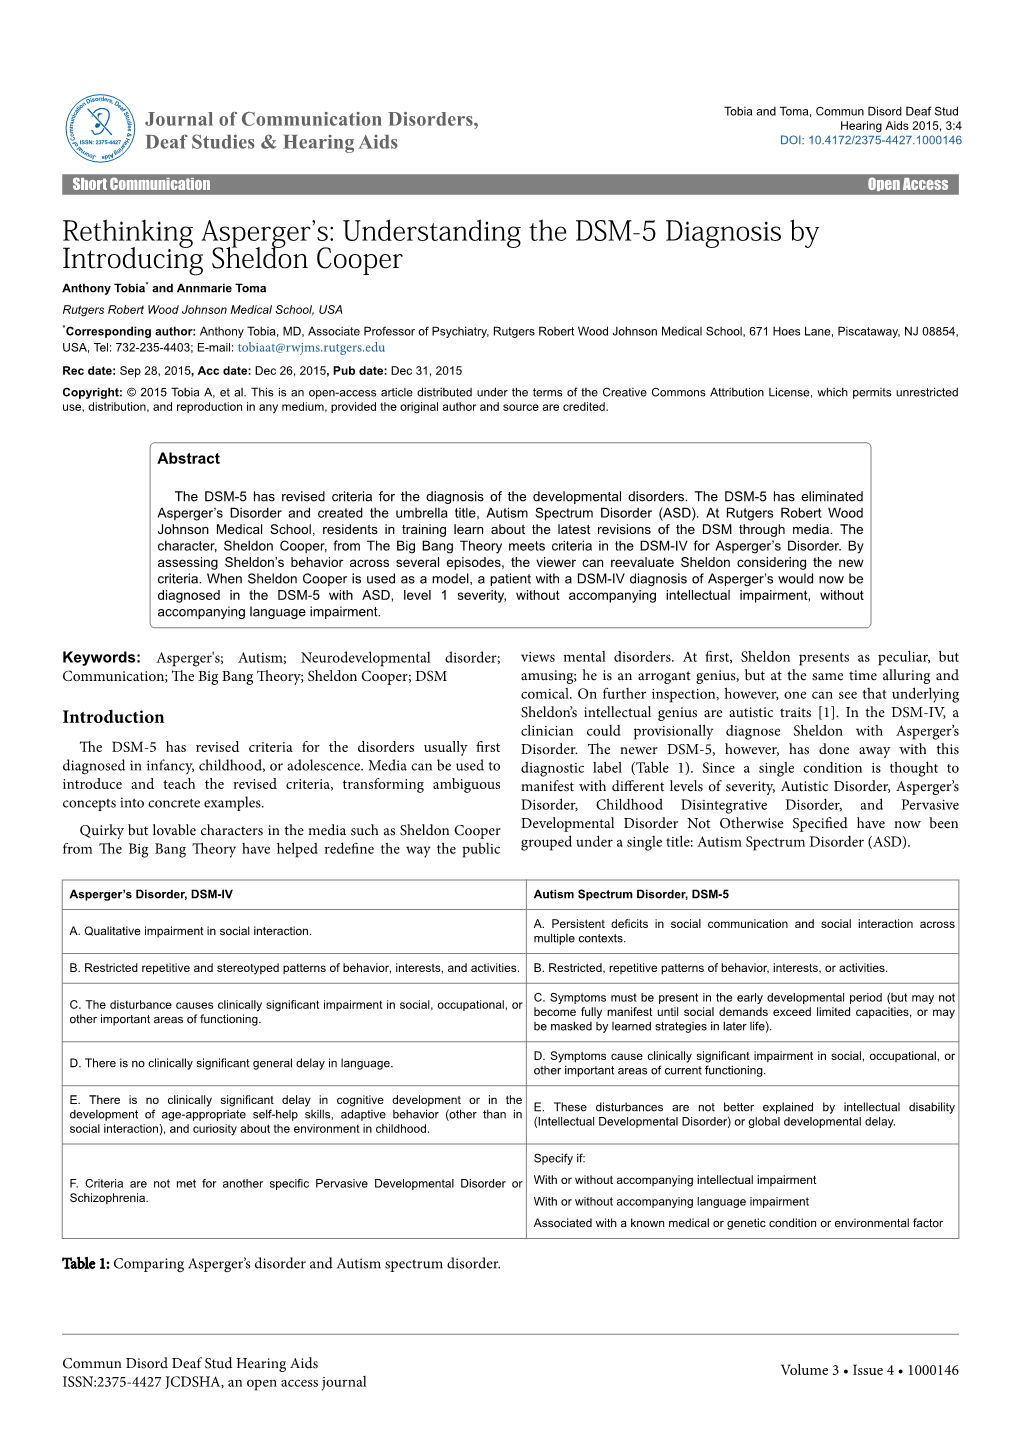 Understanding the DSM-5 Diagnosis By